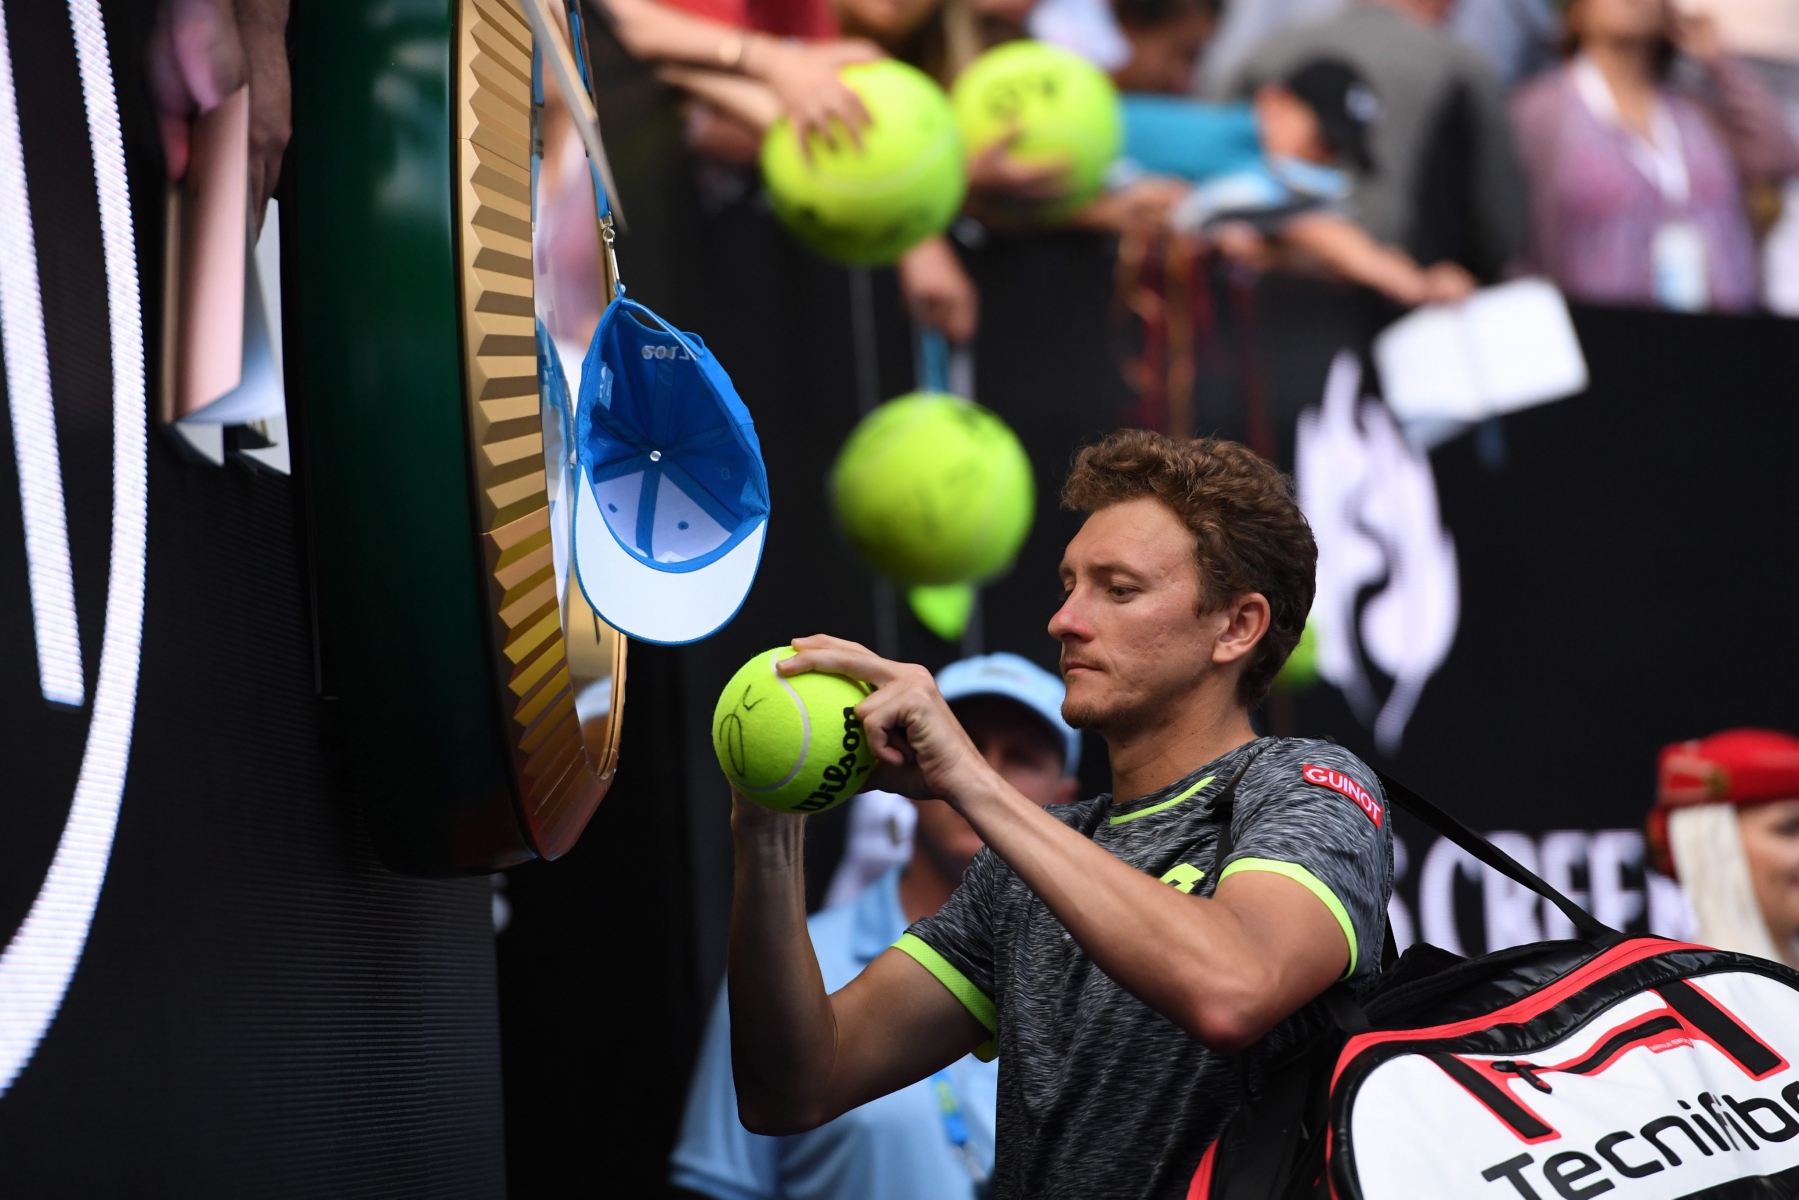 epa05729939 Denis Istomin signs autographs after defeating Novak Djokovic of Serbia in round two of the Menís Singles at the Australian Open Grand Slam tennis tournament in Melbourne, Victoria, Australia, 19 January 2017.  EPA/TRACEY NEARMY AUSTRALIA AND NEW ZEALAND OUT AUSTRALIA TENNIS AUSTRALIAN OPEN GRAND SLAM